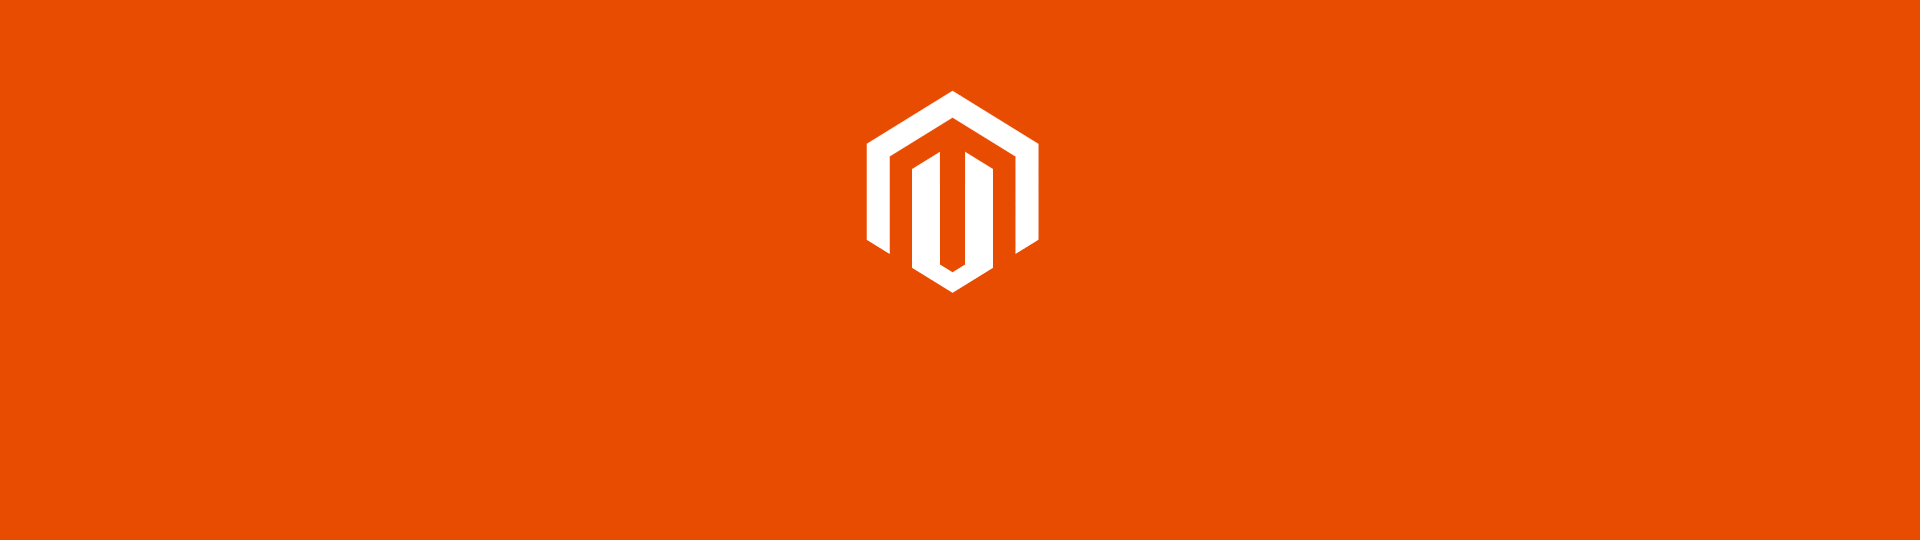 Thinking of Migrating from Magento 1 to Magento 2?